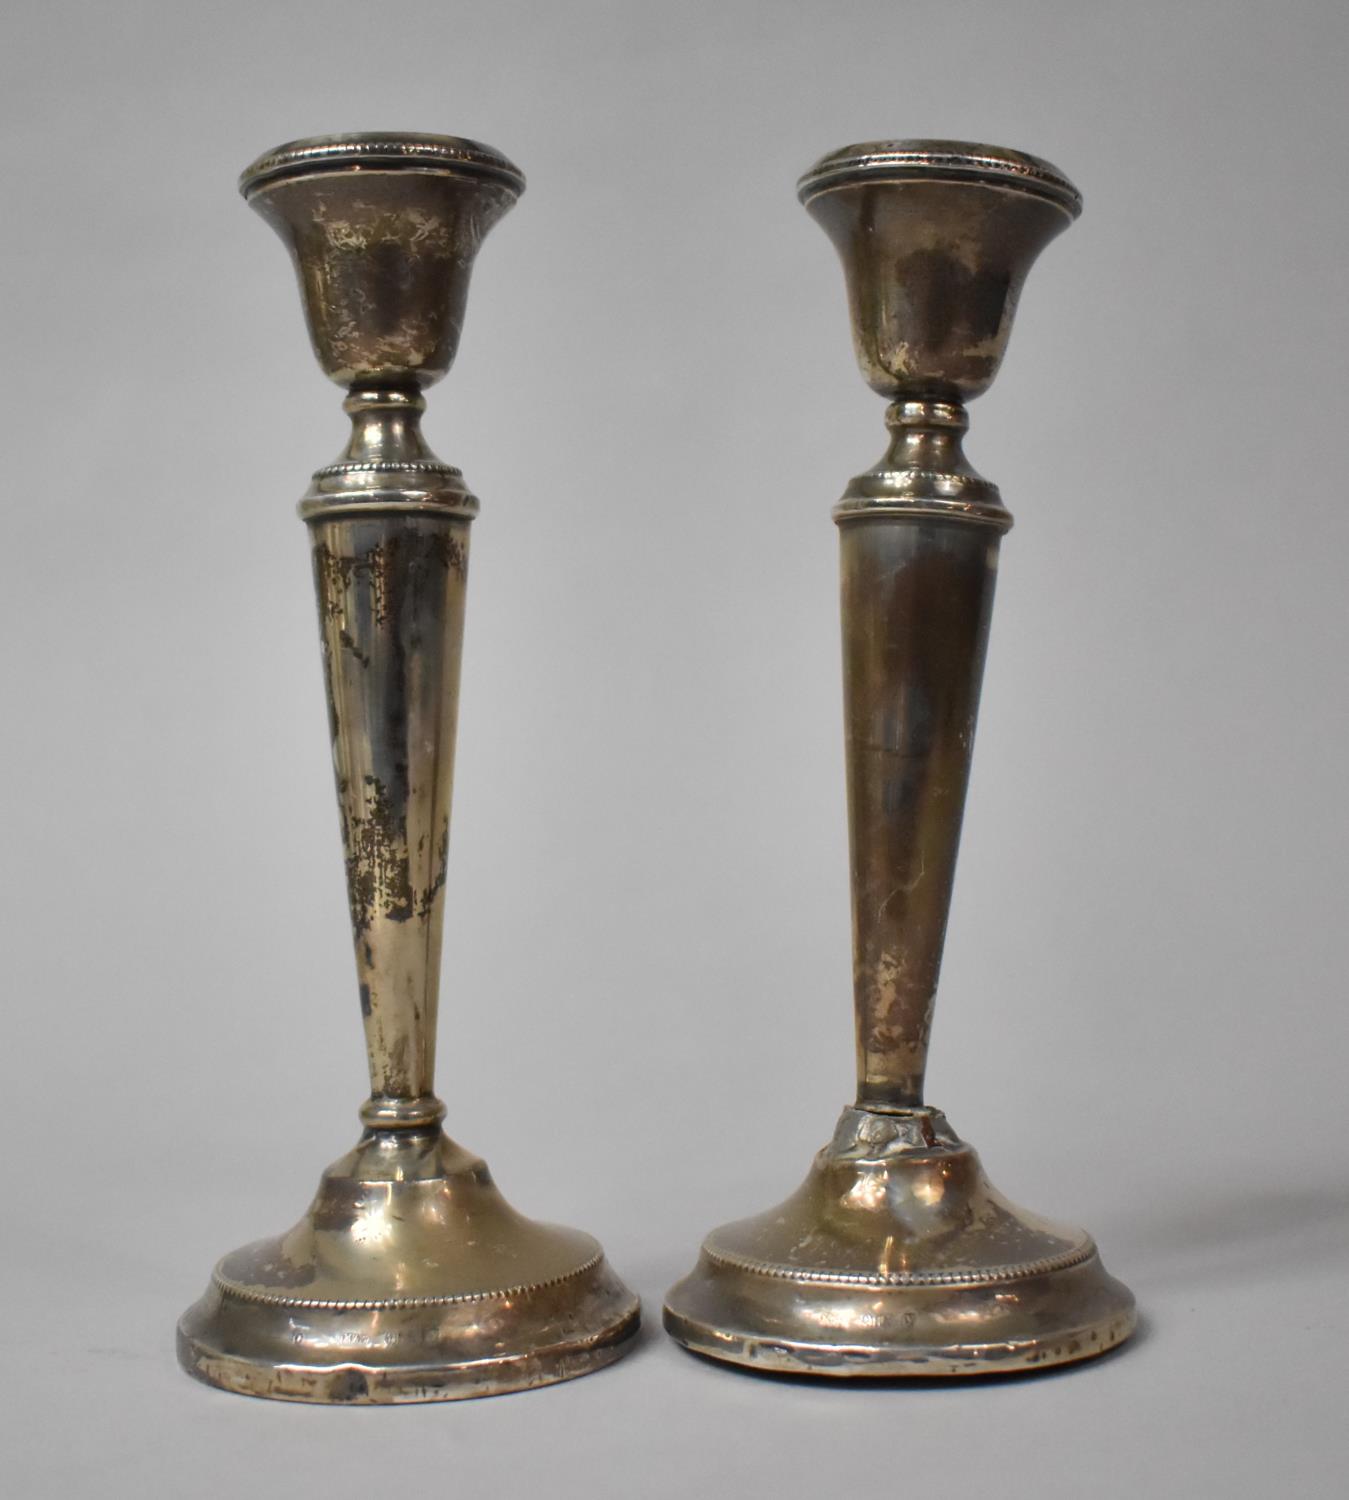 A Pair of Silver Candlesticks, Birmingham Hallmark, 18cm high, Both with Varying Condition Issues